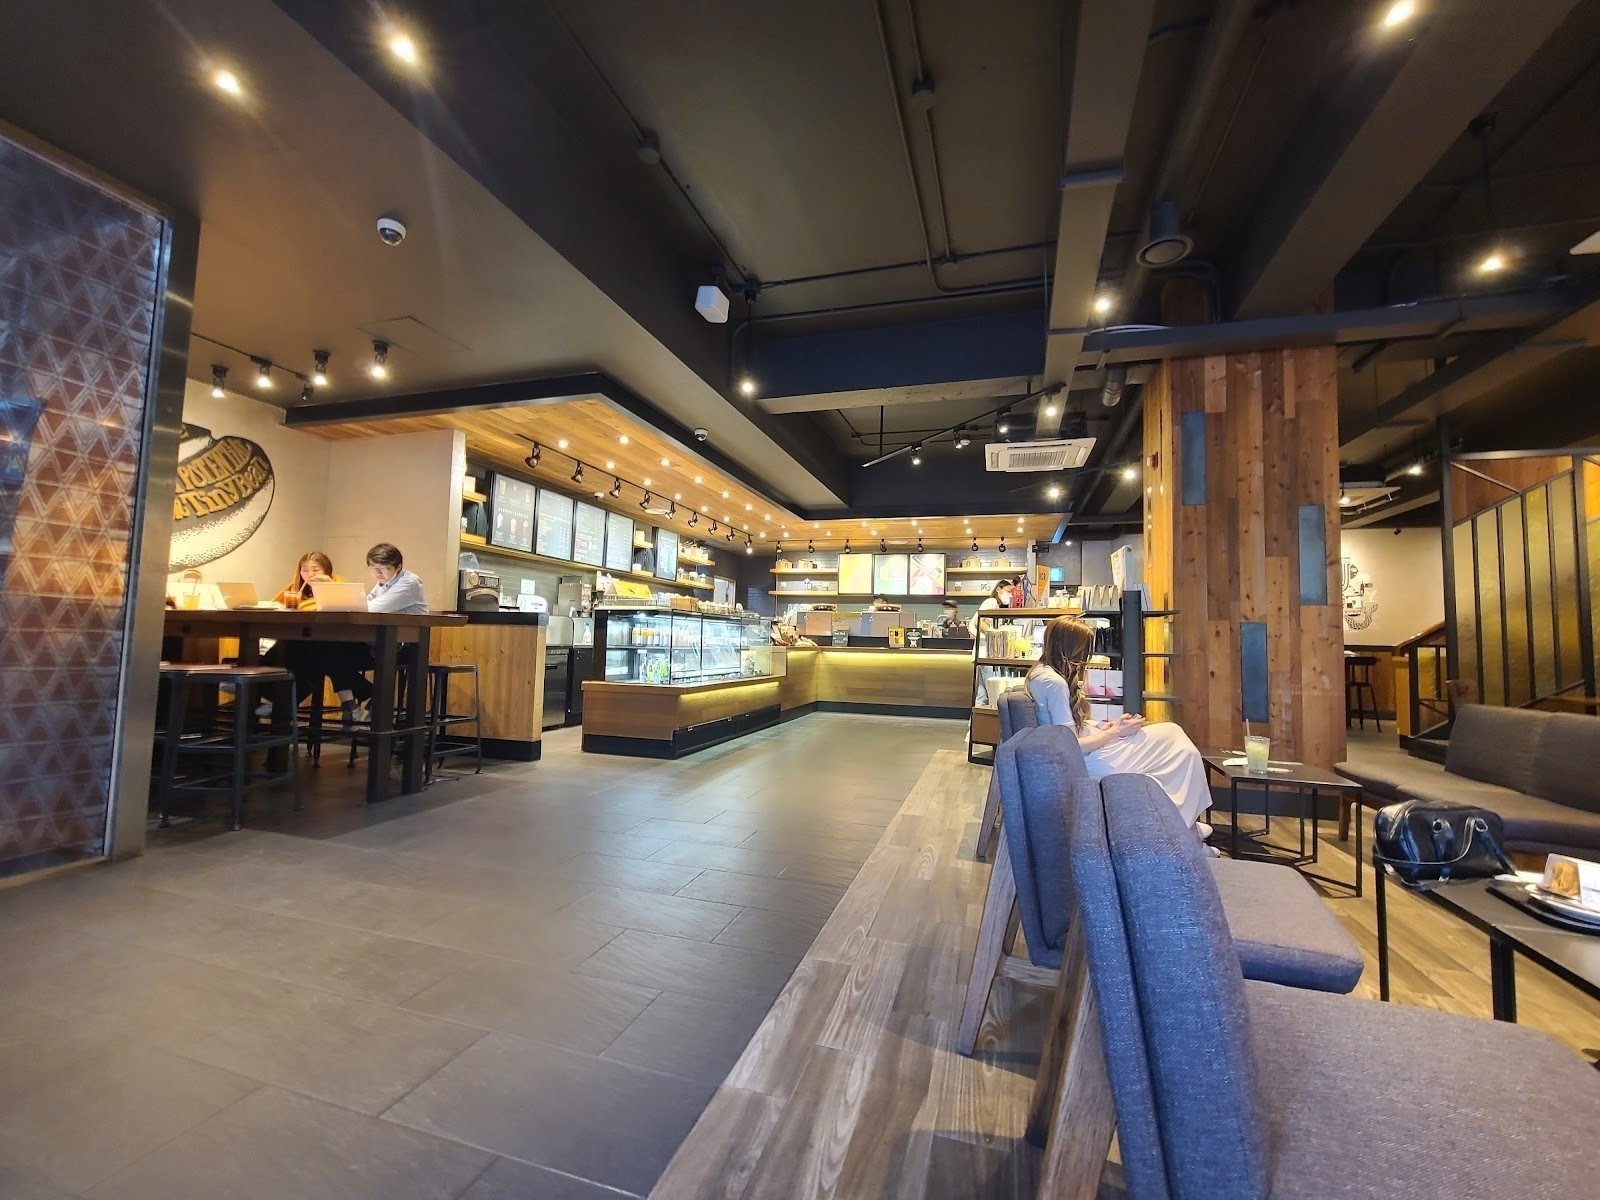 <span class="translation_missing" title="translation missing: en.meta.location_title, location_name: Starbucks @ 199-18 Yonghyeon Dong, city: Incheon">Location Title</span>